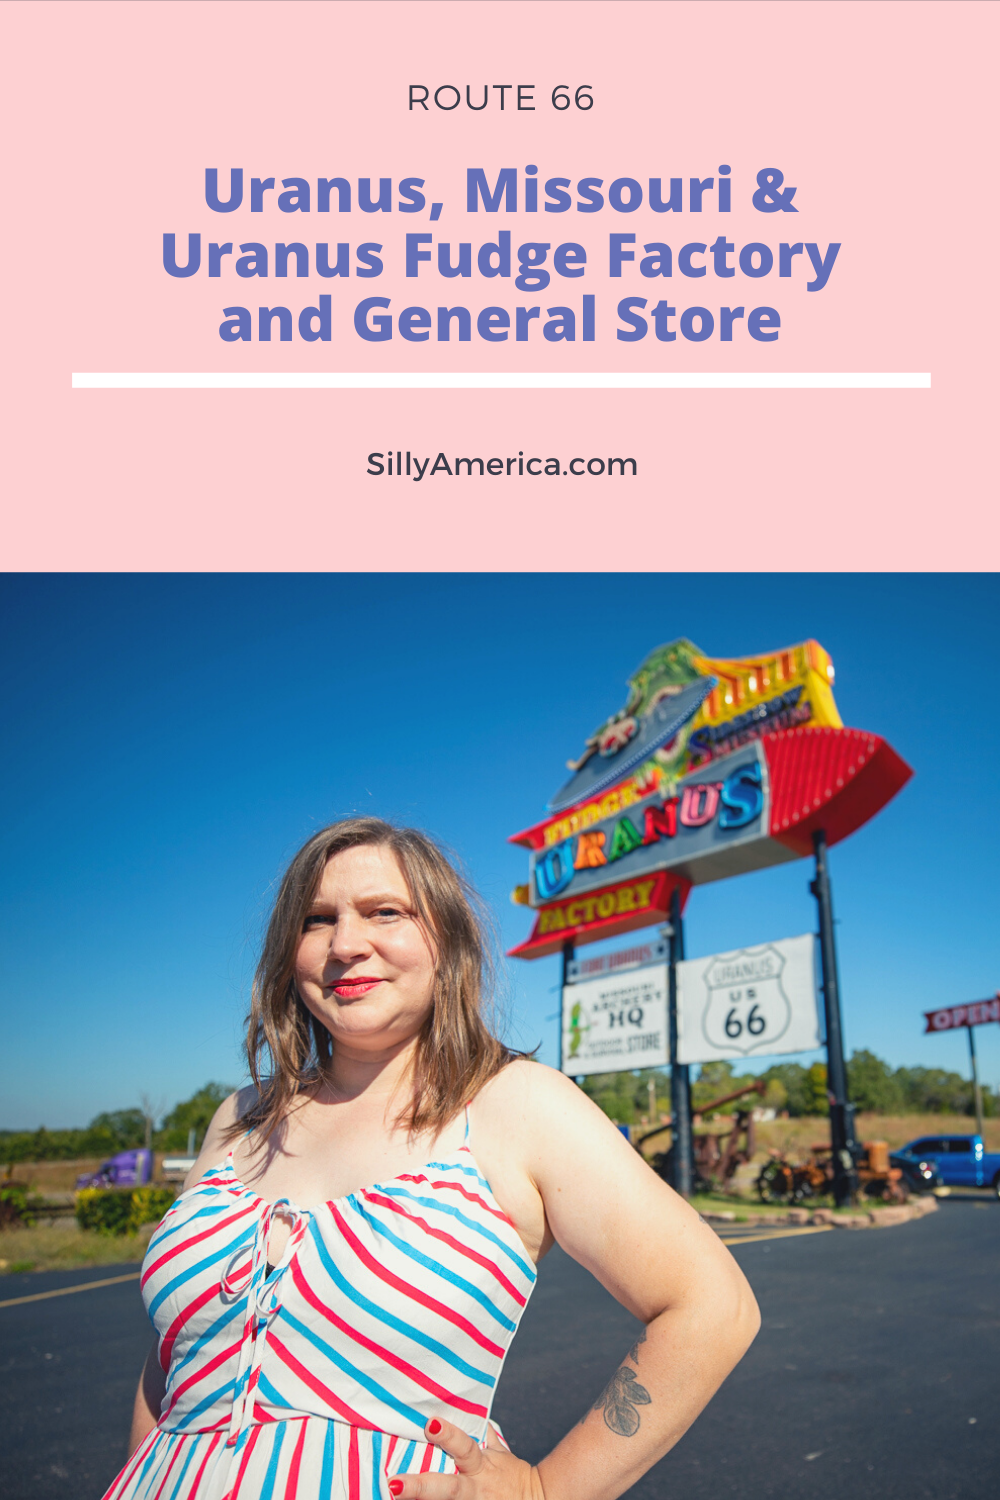 If you’re looking for a unique Route 66 attraction, you’ve got to pick Uranus. Uranus, Missouri that is. Visit the town on a Route 66 road trip, stop for fudge at Uranus Fudge Factory and General Store, and check out all of the weird Missouri roadside attractions while you're there!  #Route66 #Route66RoadTrip #MissouriRoute66 #Missouri #MissouriRoadTrip #MissouriRoadsideAttractions #RoadsideAttractions #RoadsideAttraction #RoadsideAmerica #RoadTrip